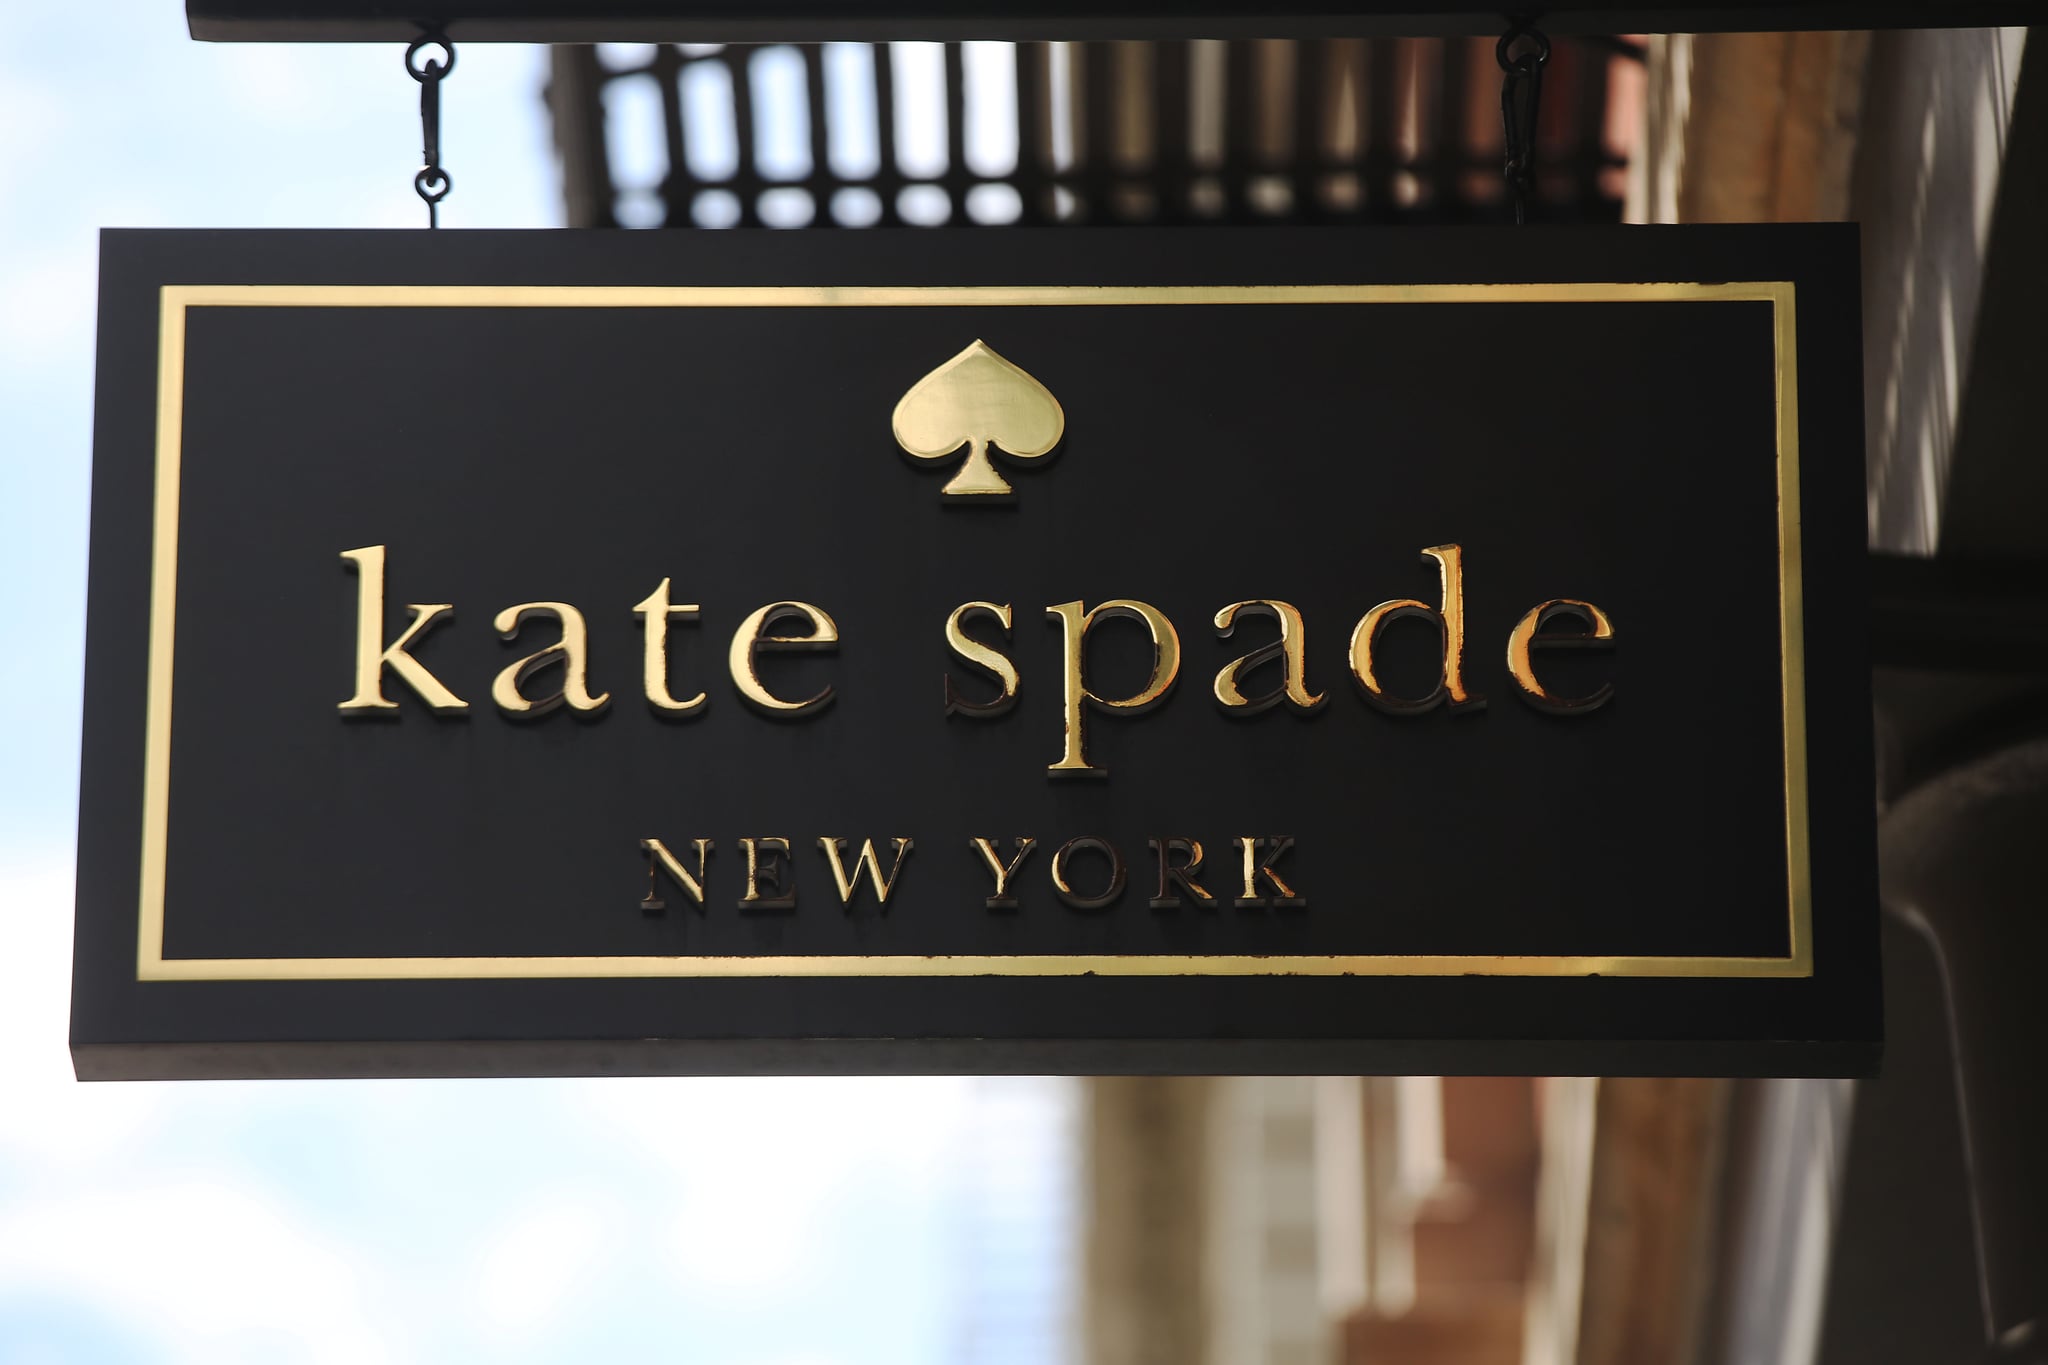 NEW YORK, NY - MAY 08:  A Kate Spade store stands in the SoHo neighborhood of Manhattan on May 8, 2017 in New York City. Coach, the American maker of high-end luxury goods, announced on Monday that it would buy rival Kate Spade in a $2.4 billion deal.  (Photo by Spencer Platt/Getty Images)